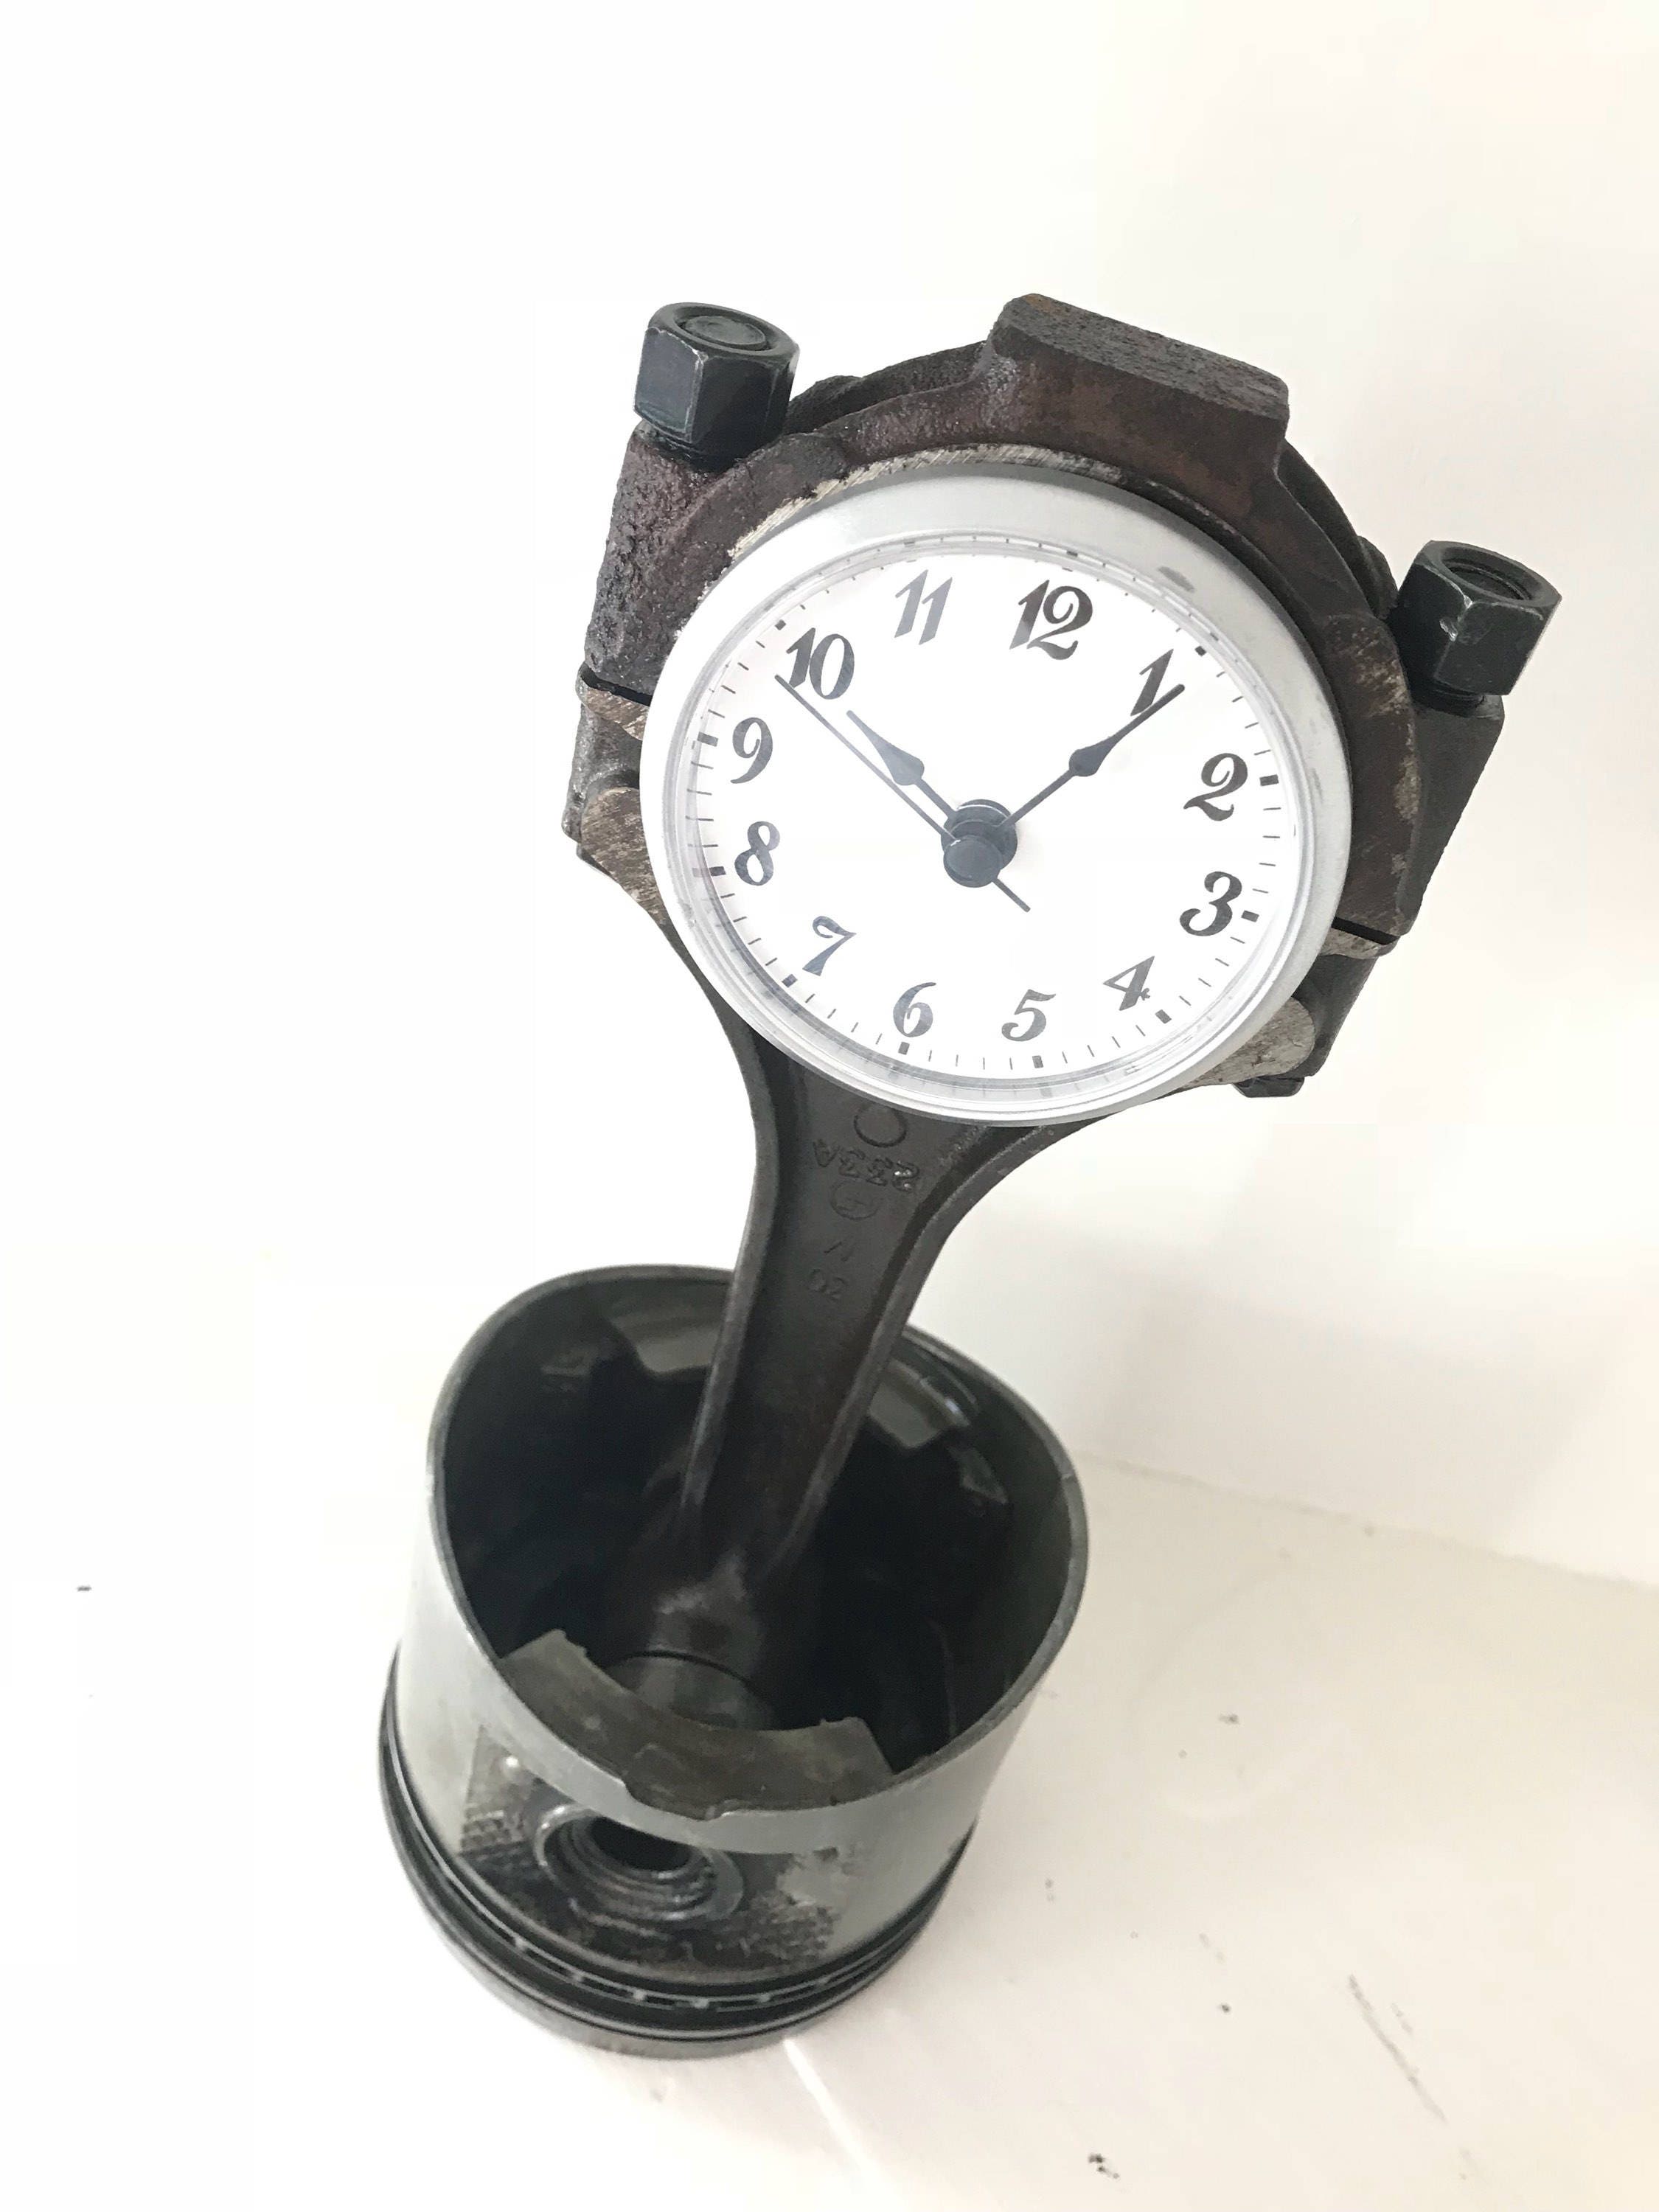 Clock made out of a car engine's piston in a patina finish with a silver clock ring.